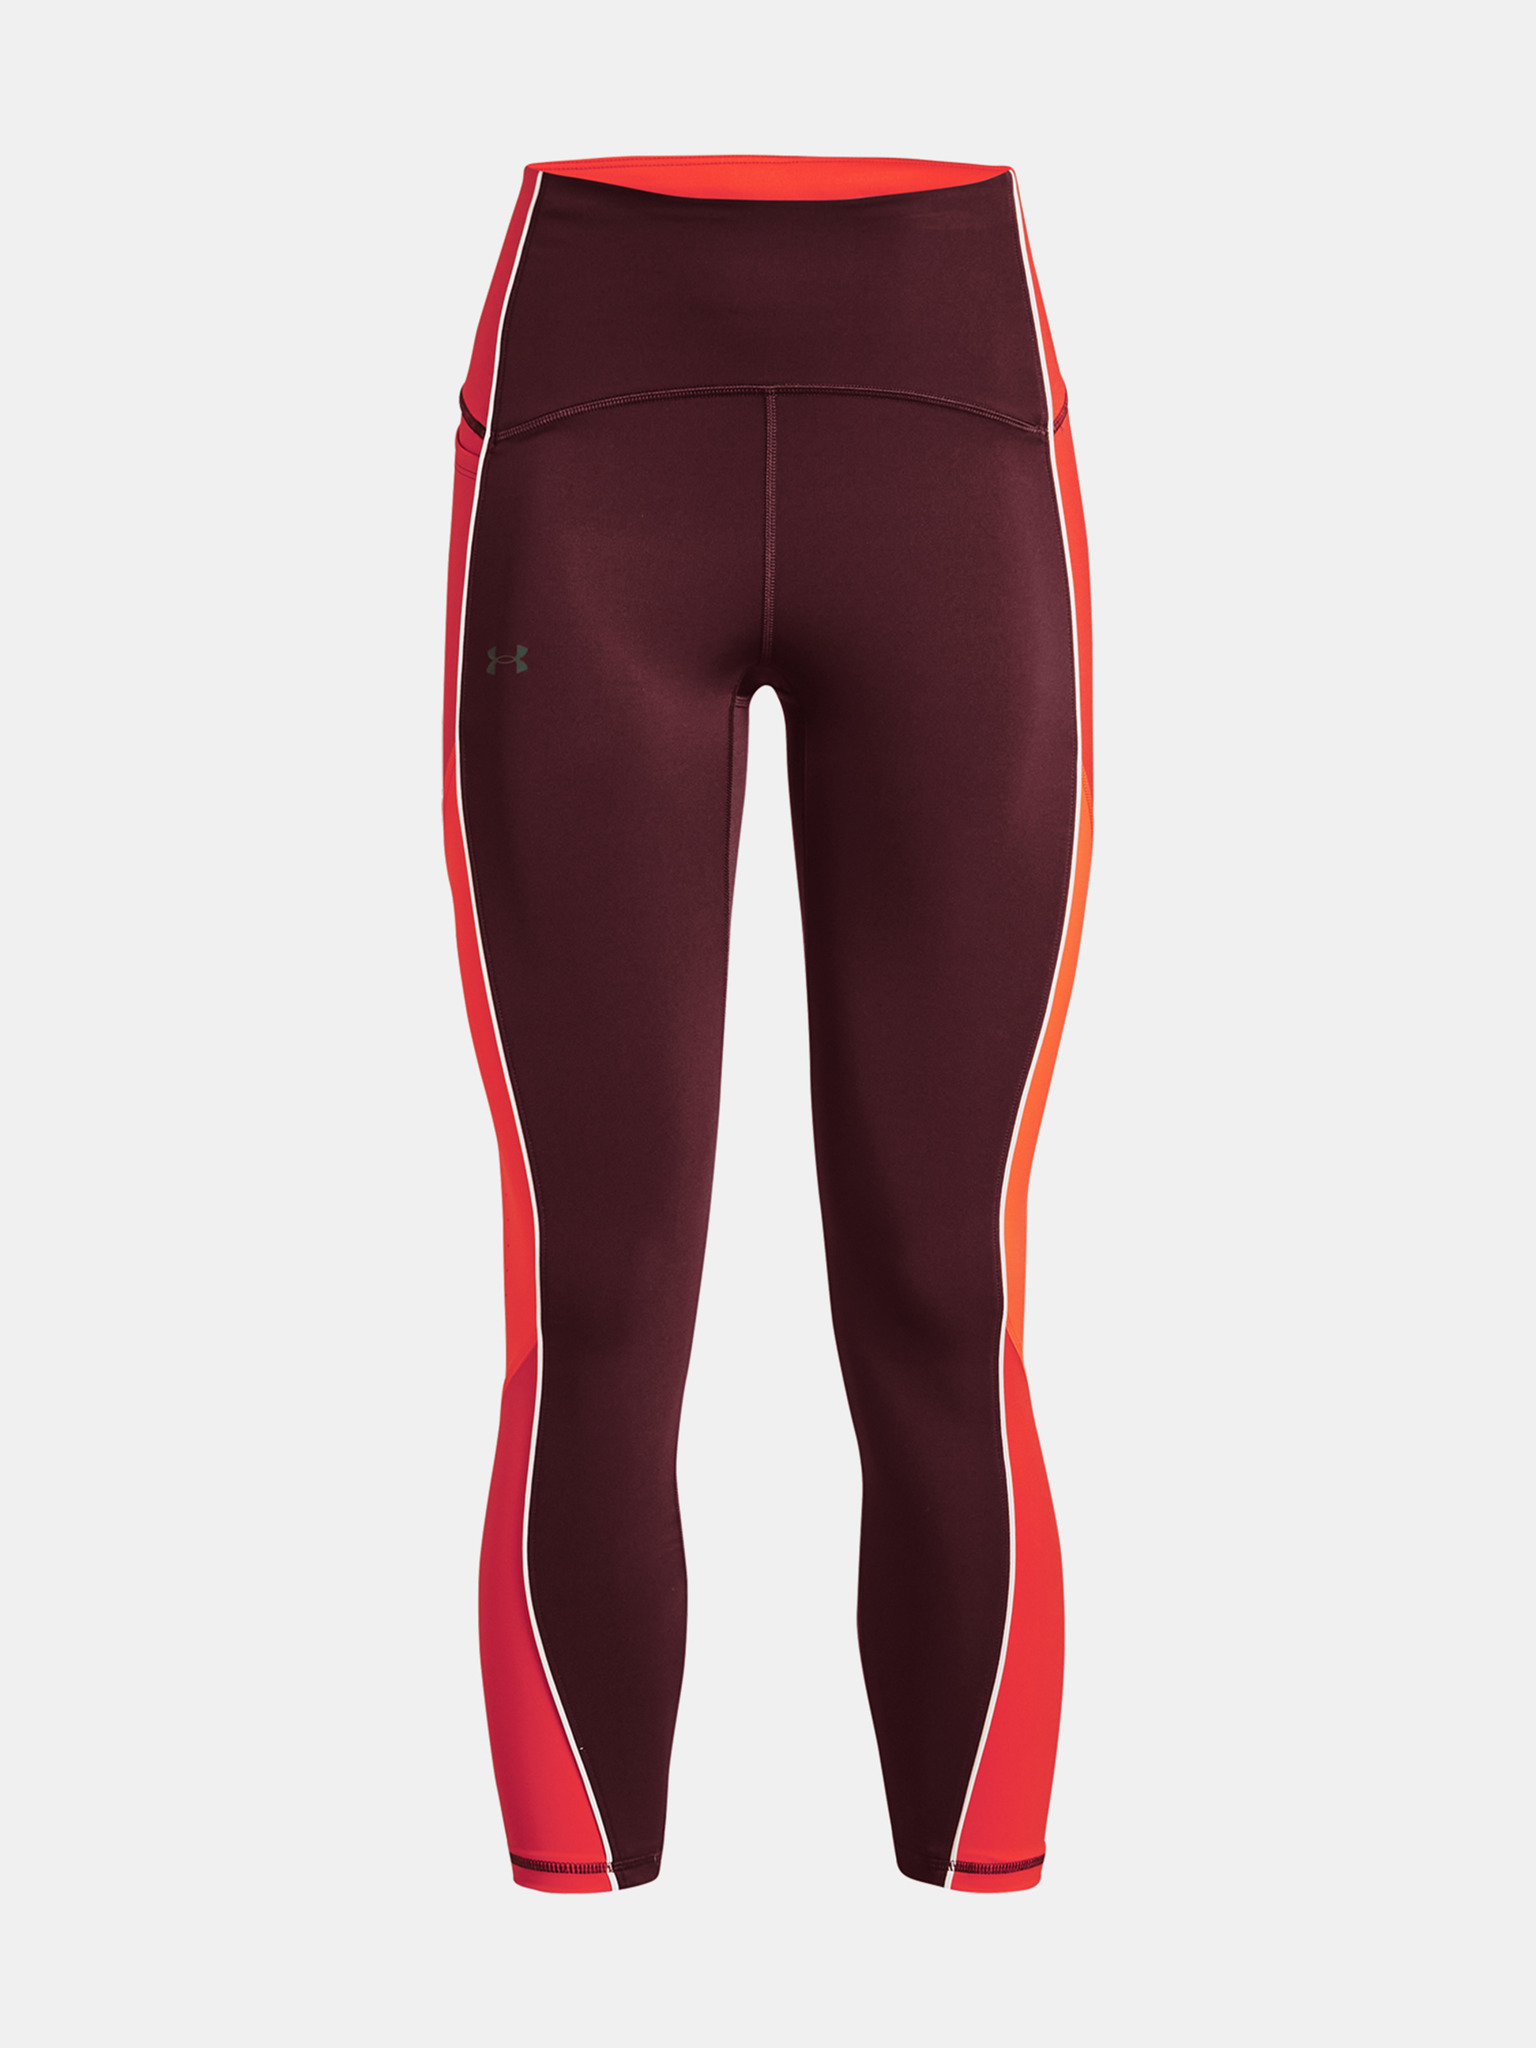 Under Armour RUSH full length women's compression leggings. New, Size S RRP  £85